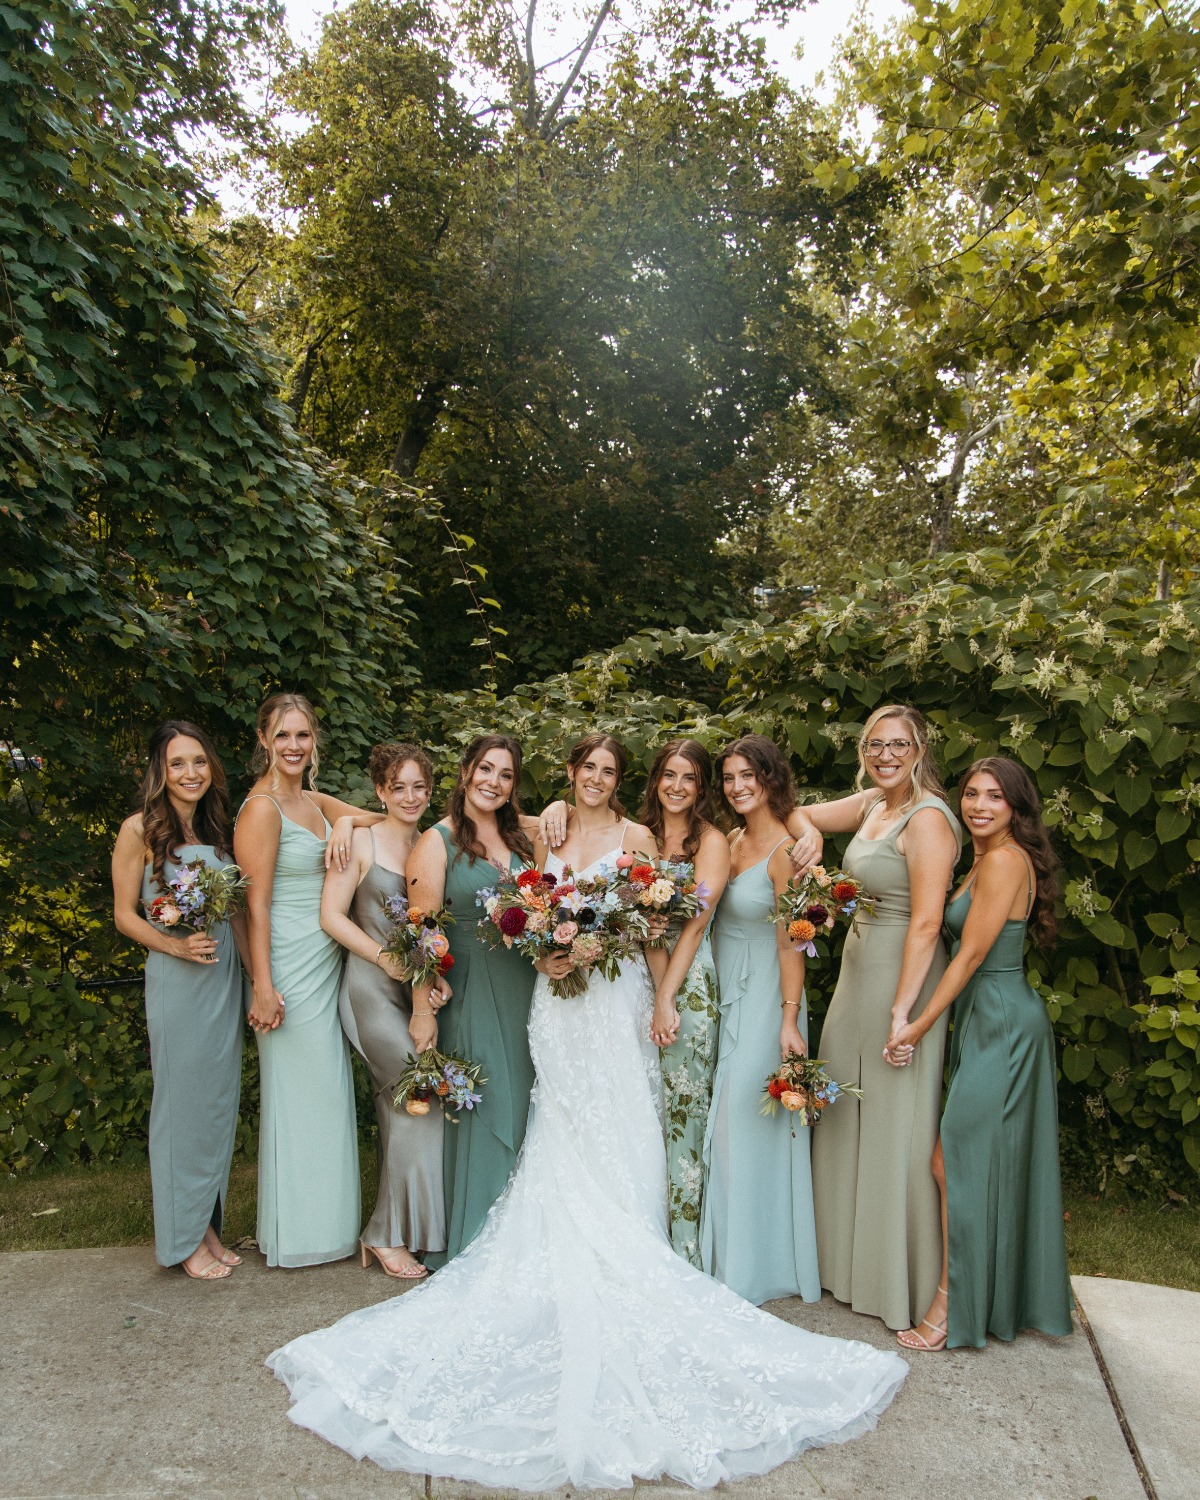 New York bride with bridesmaids in mix and match dresses